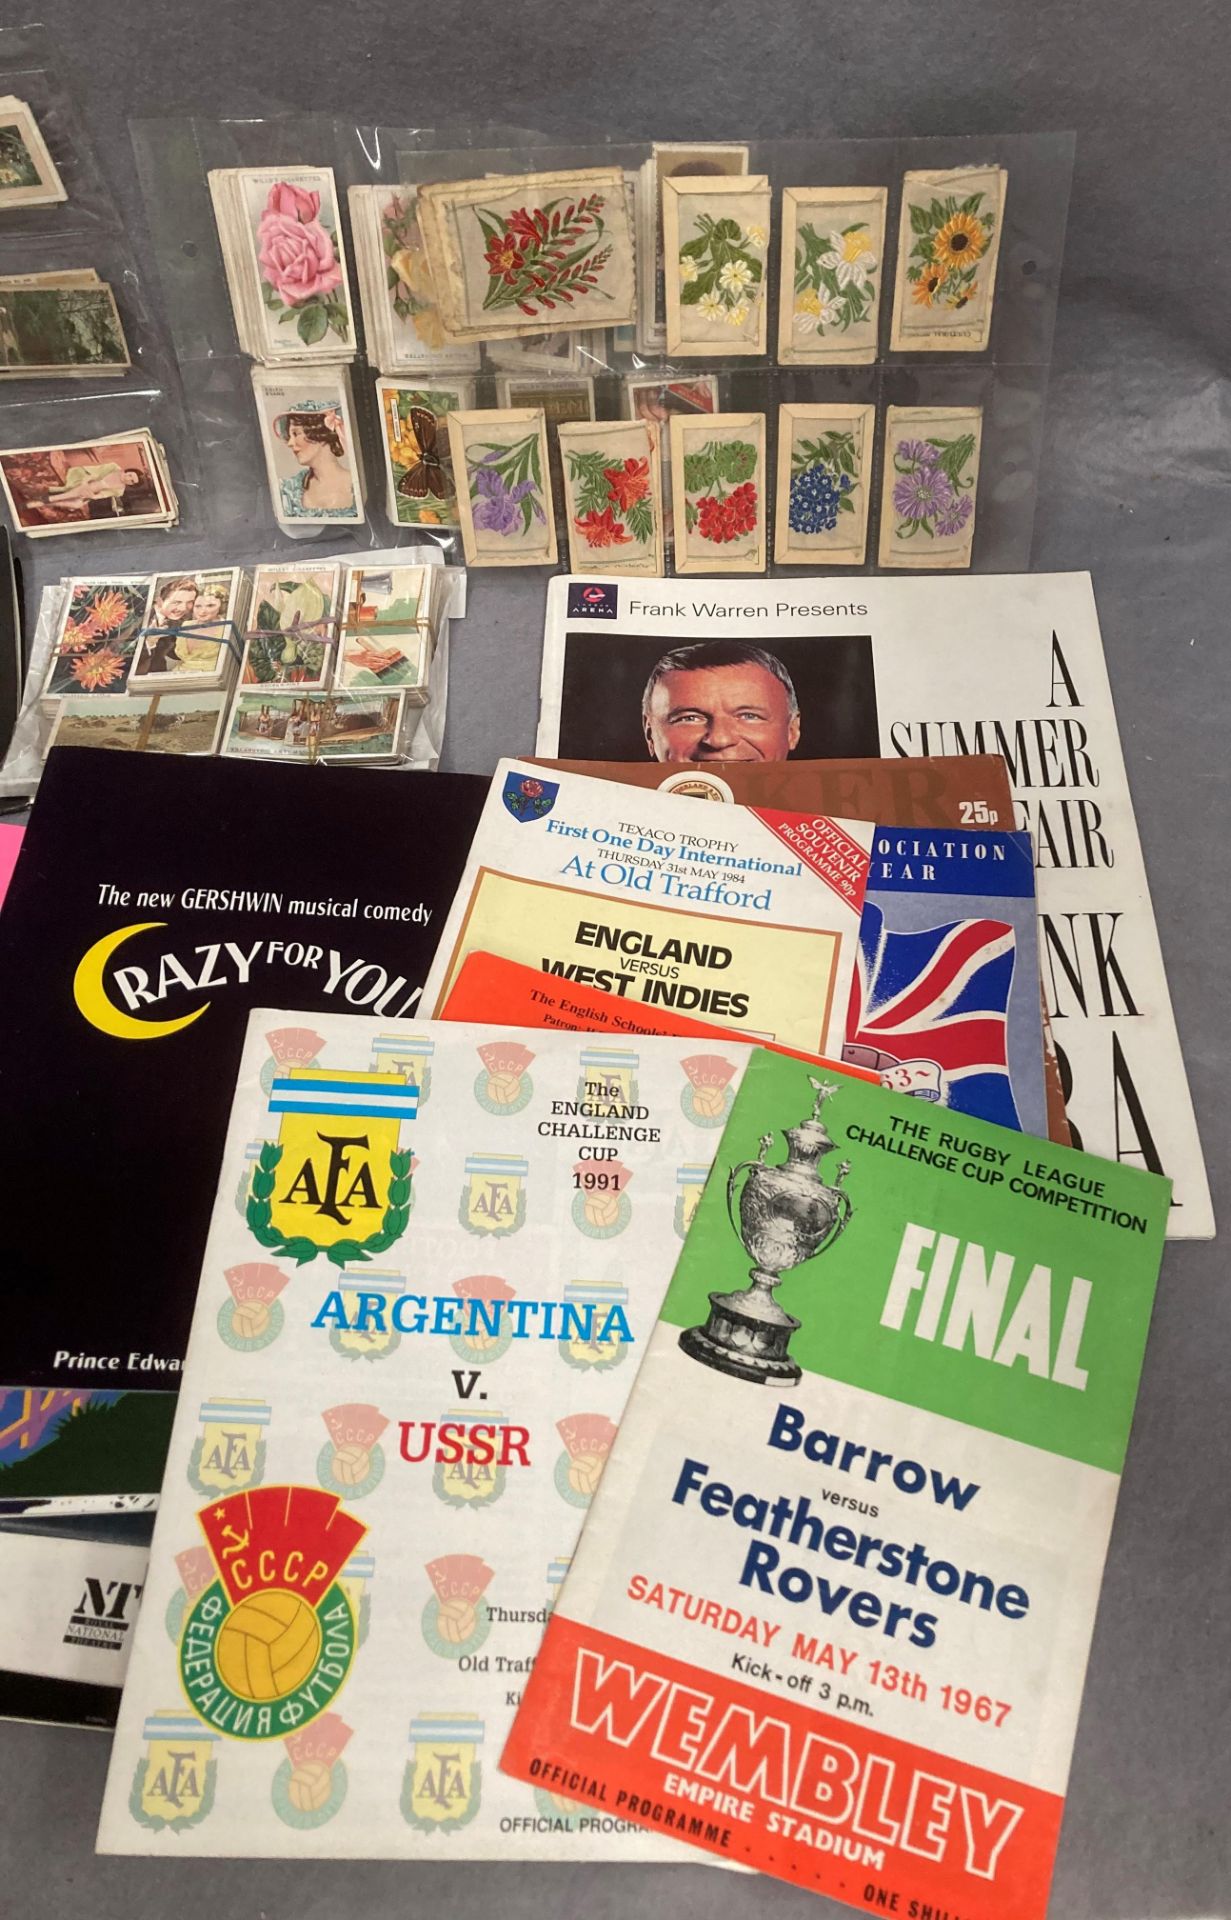 Superb mixed lot of paper collectibles and ephemera, event programmes, concerts (inc Frank Sinatra), - Image 3 of 4